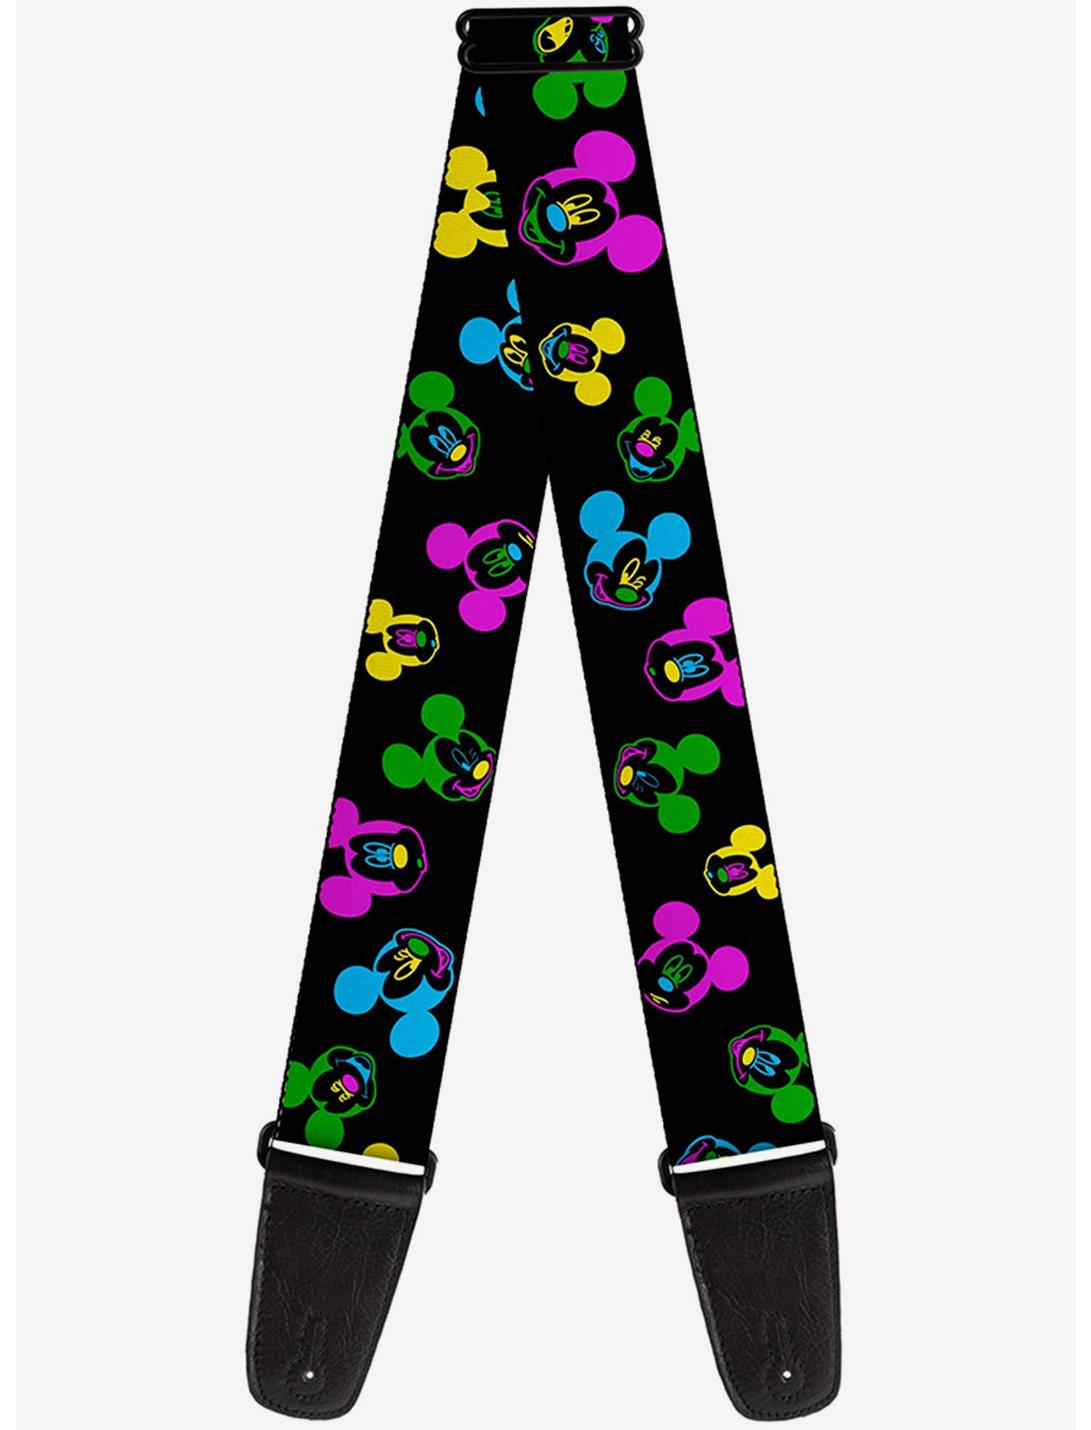 Disney Mickey Mouse Expressions Scattered Neon Guitar Strap, , hi-res